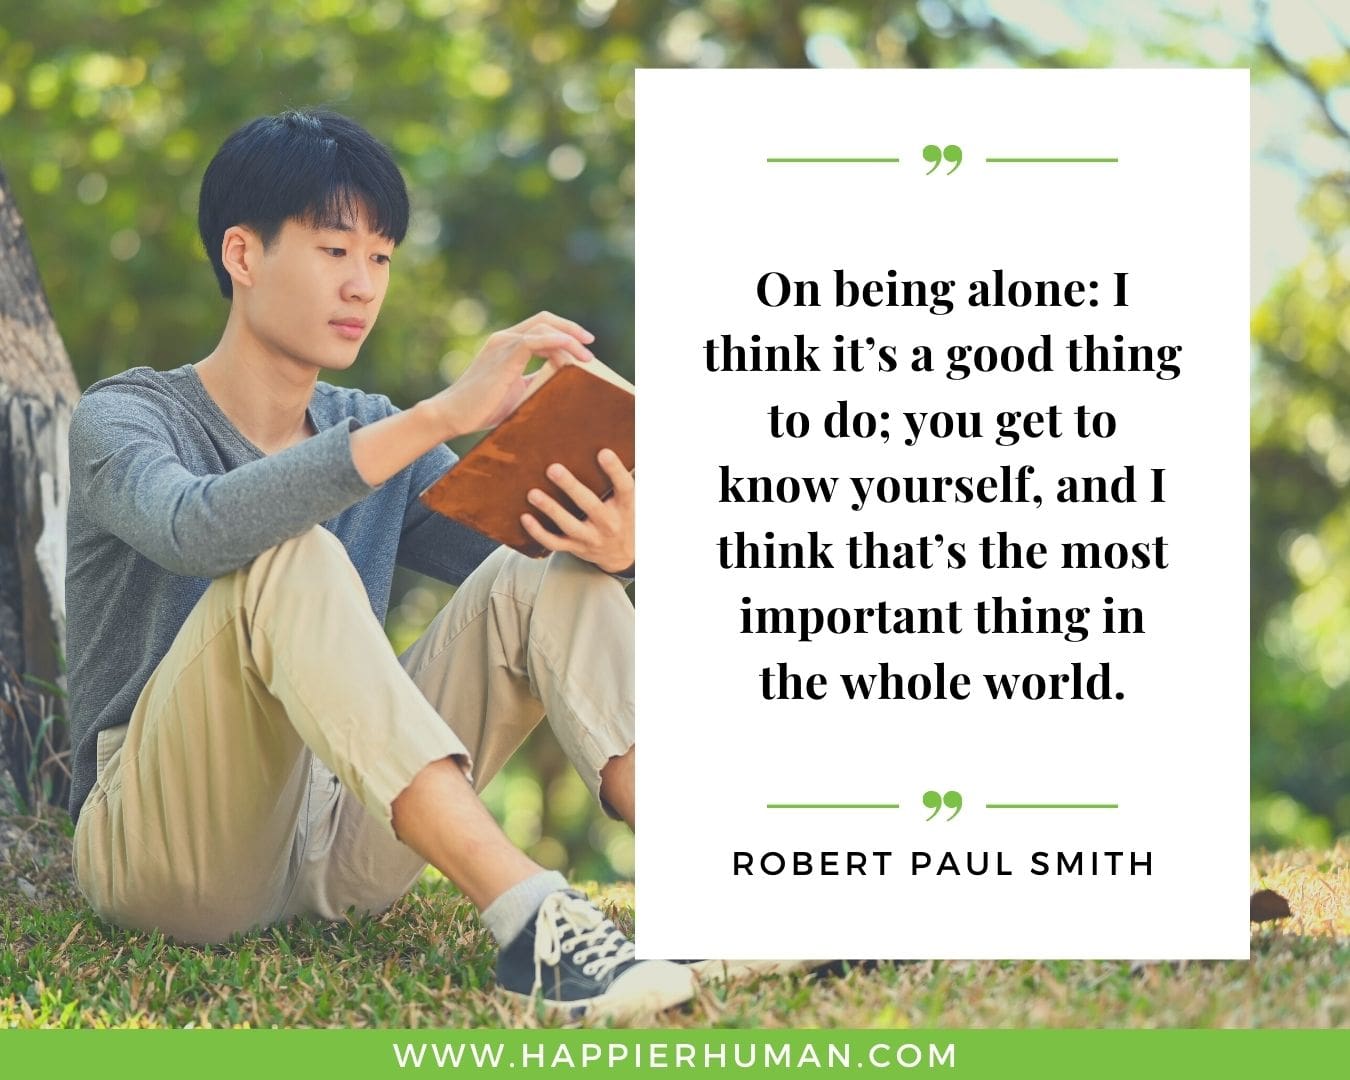 Loneliness Quotes - “On being alone: I think it’s a good thing to do; you get to know yourself, and I think that’s the most important thing in the whole world.” – Robert Paul Smith